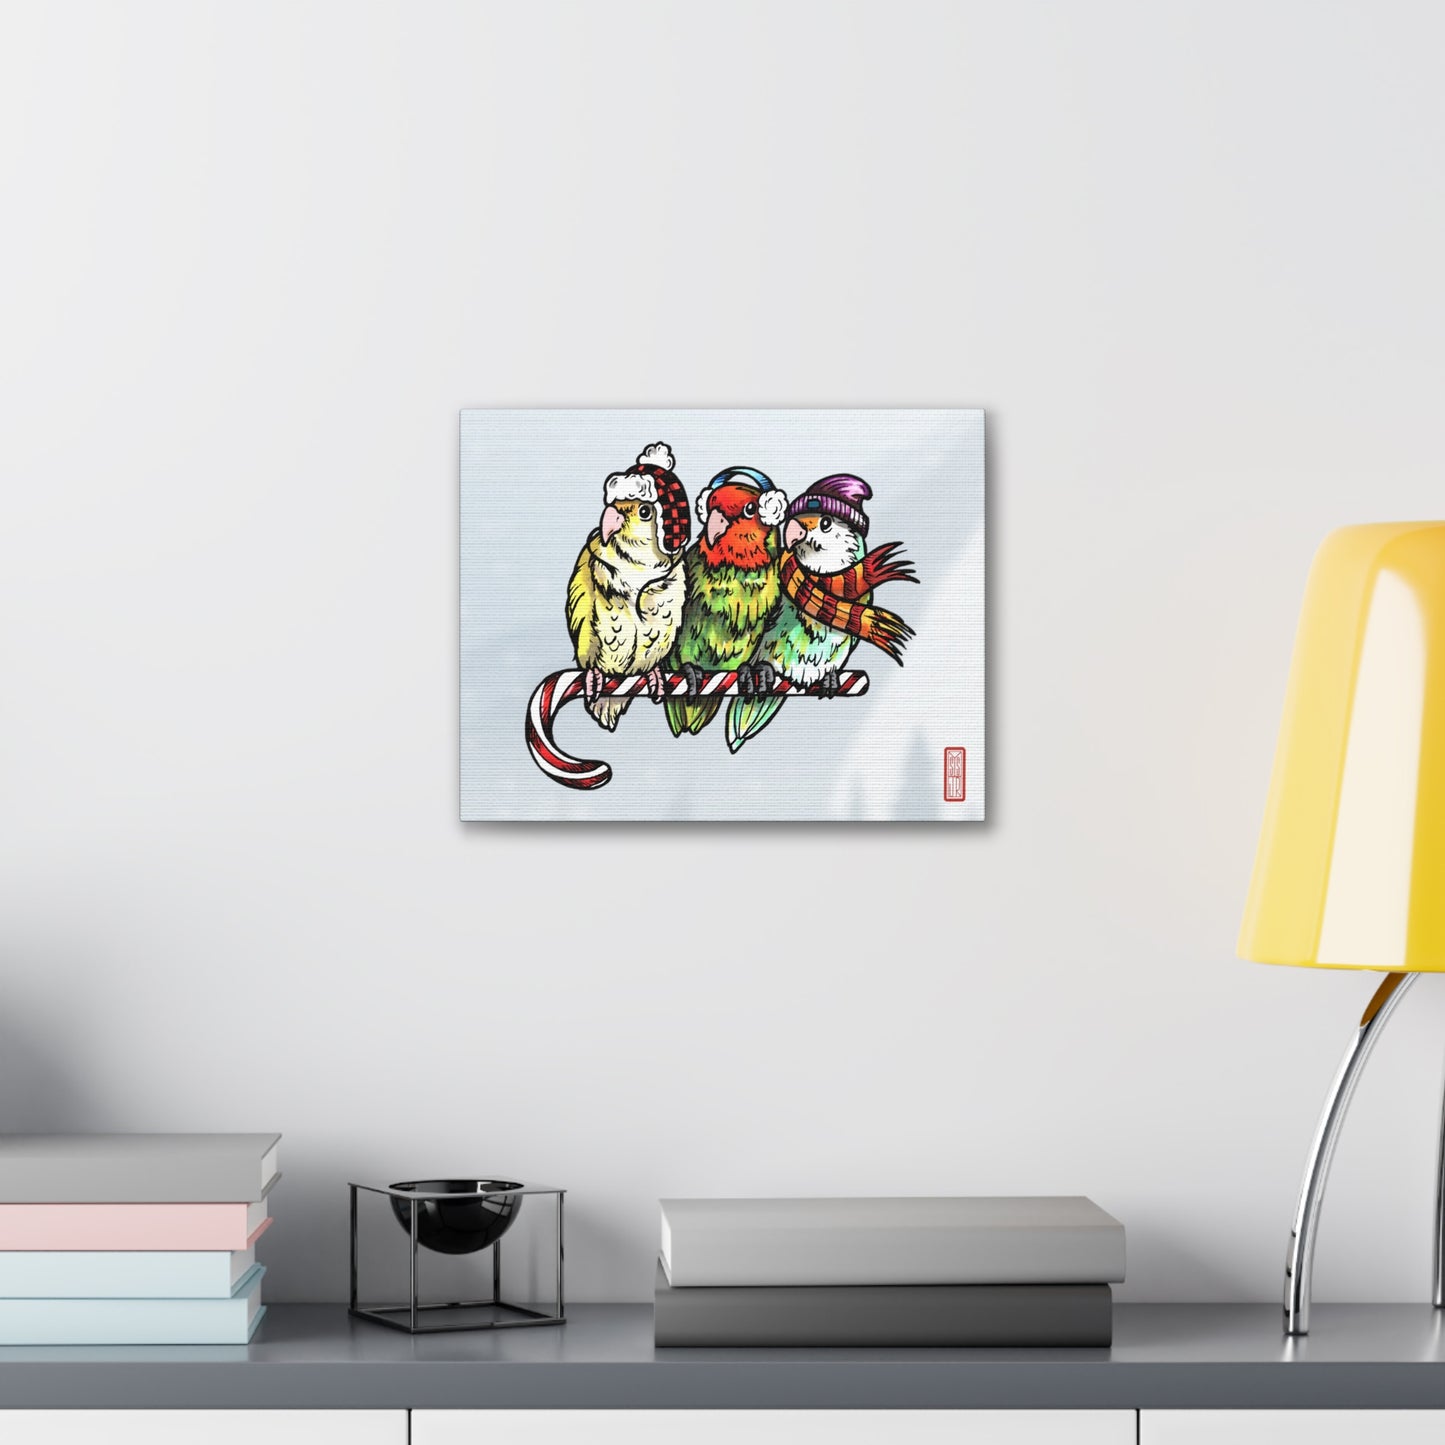 3 Lovebirds with Winter Wear & Perched on a Candy Cane, Canvas Wrap Wall Art